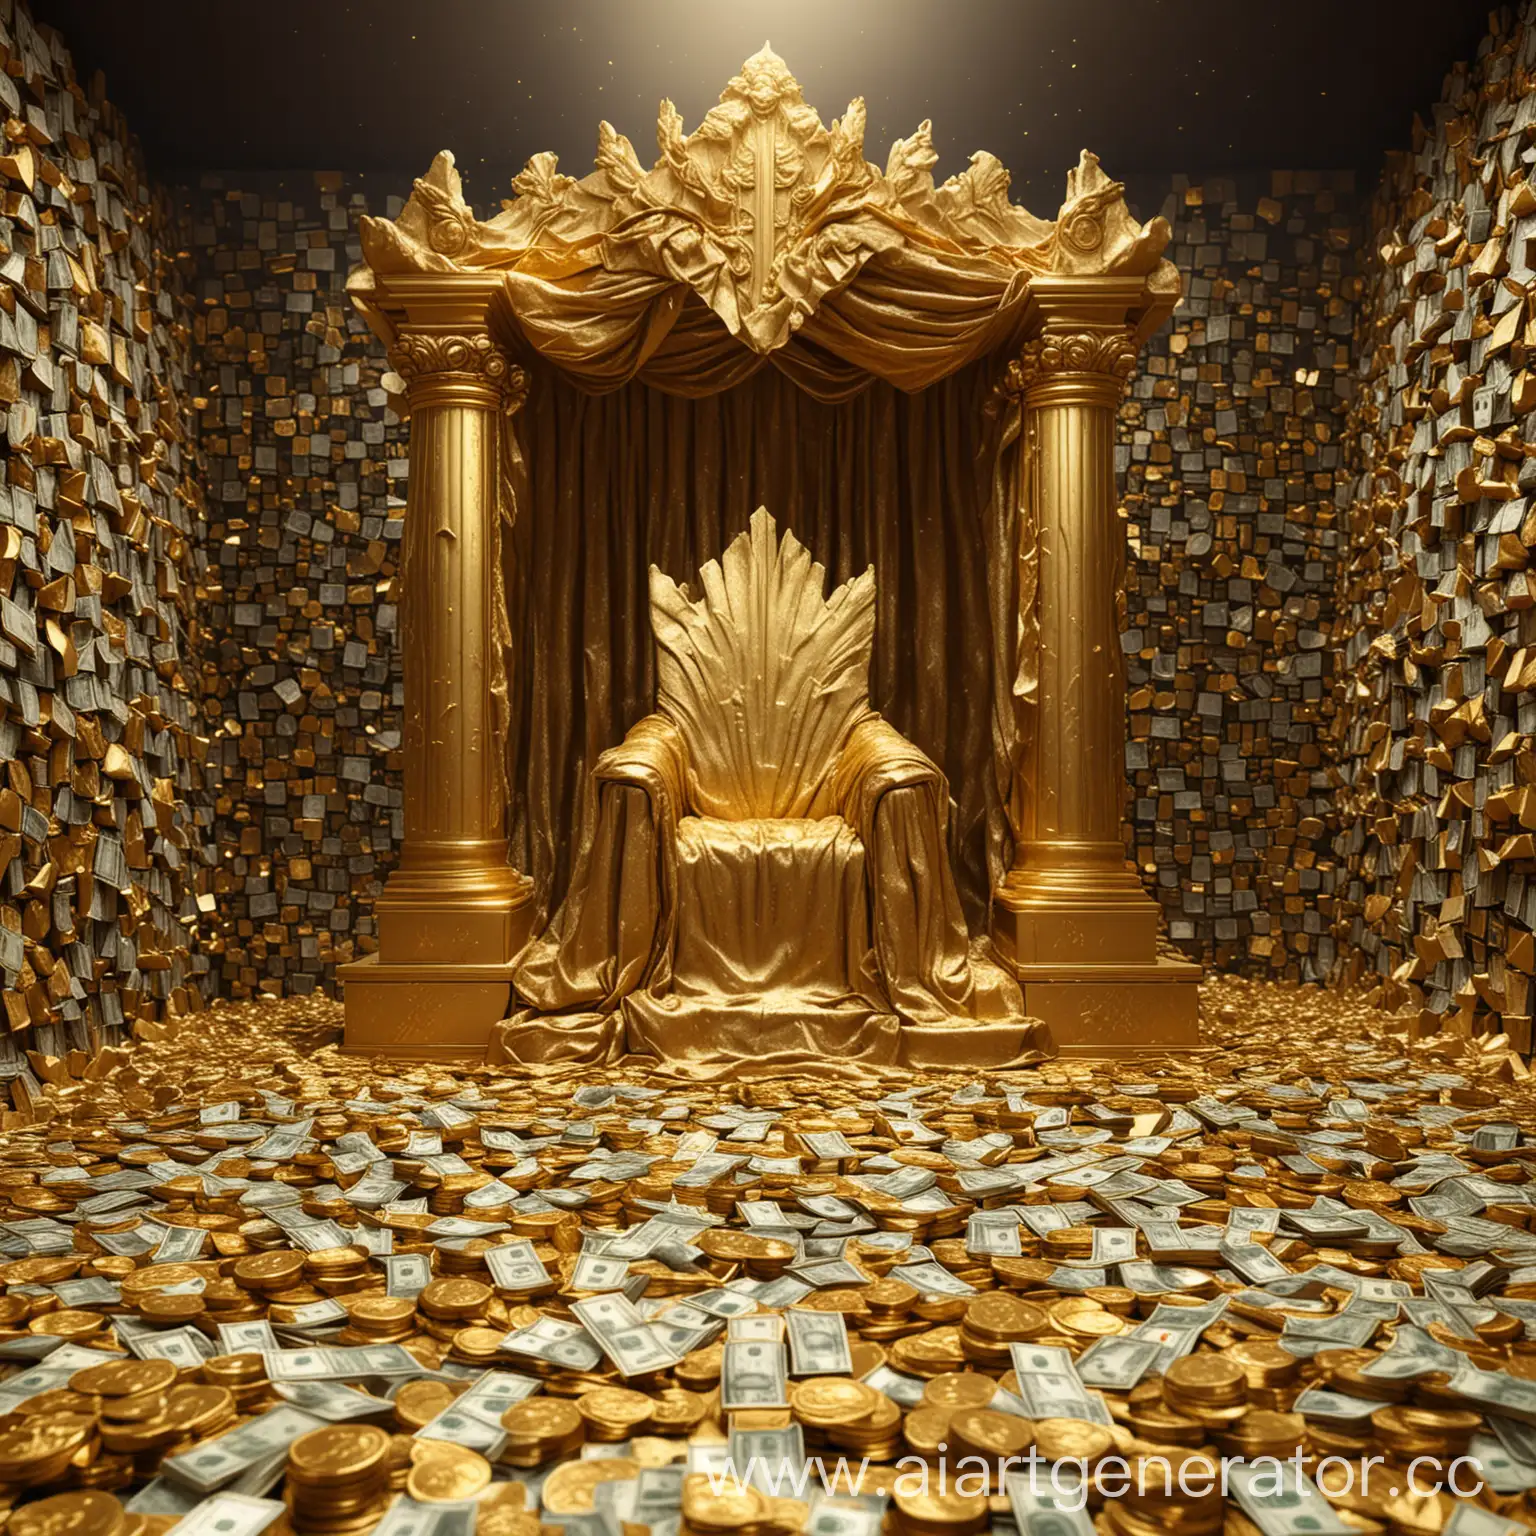 Make a golden throne and a room with a mountain of money and gold around it